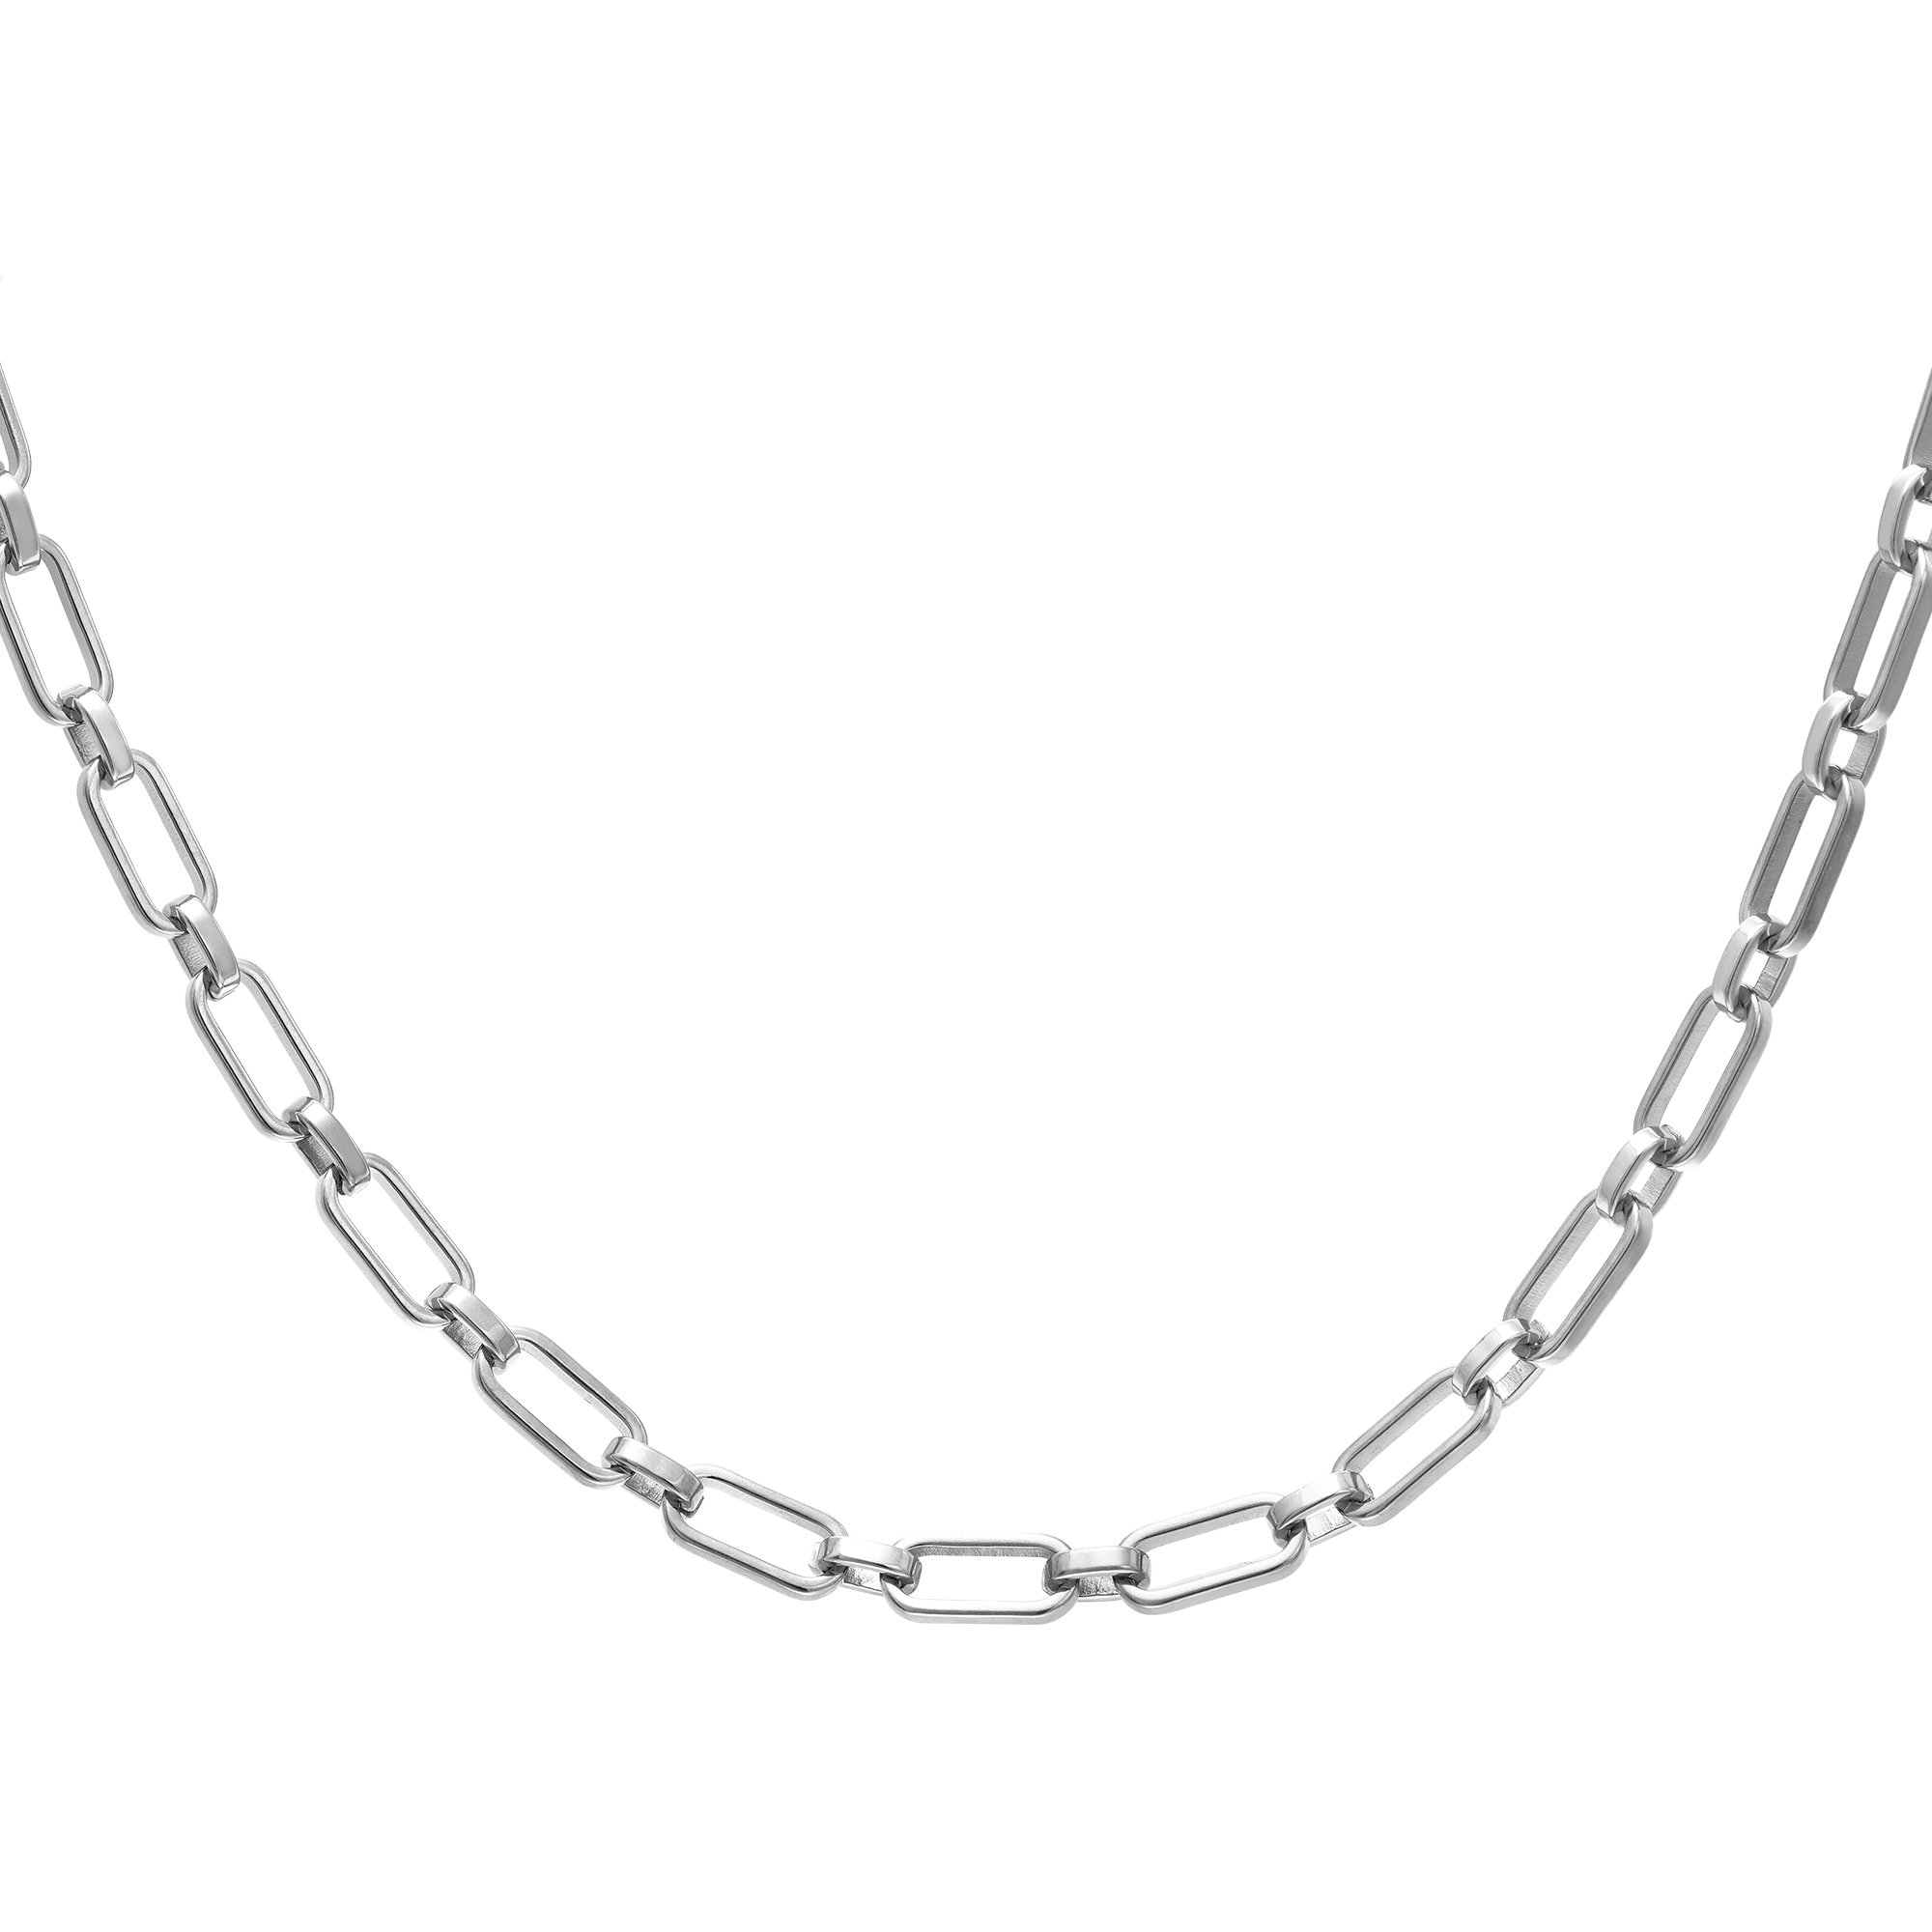 Statement necklace stainless steel